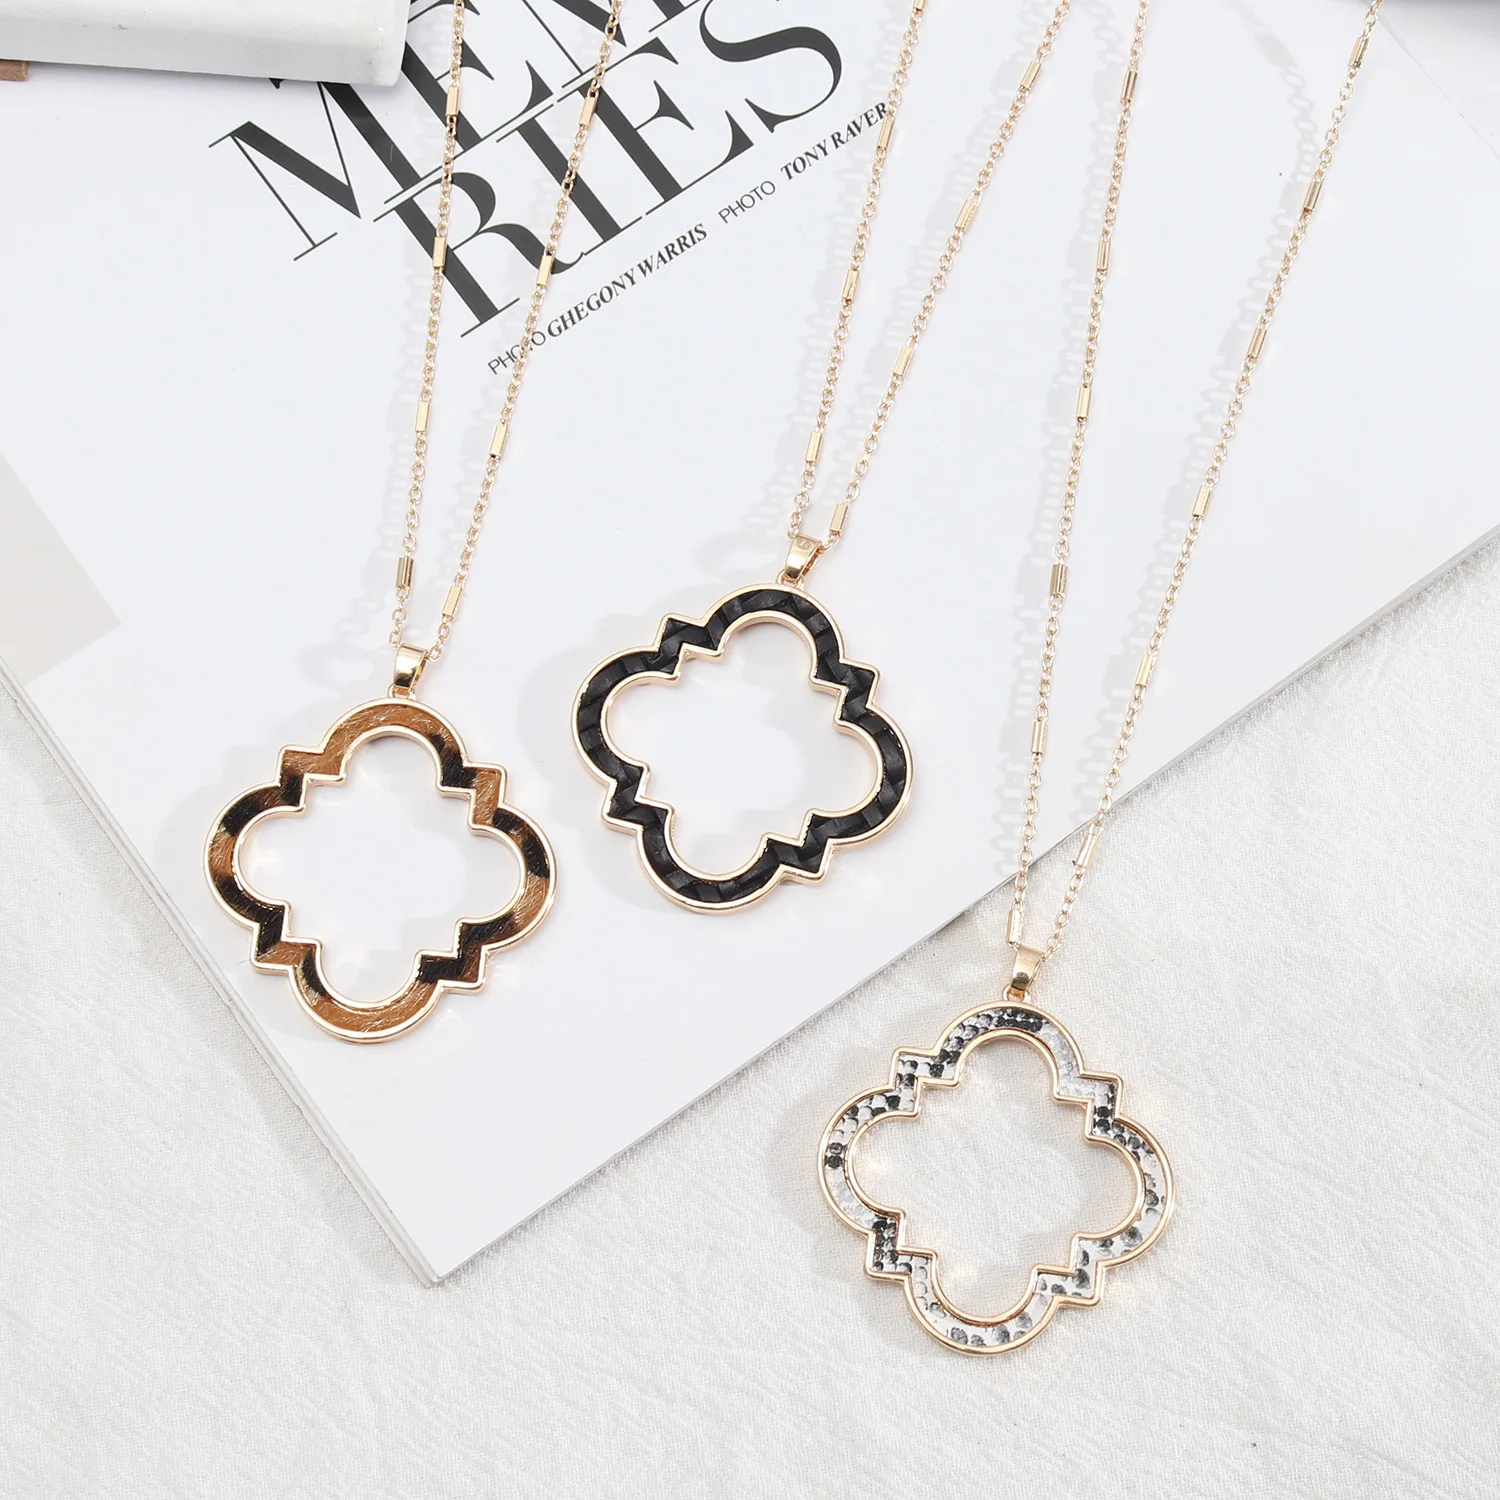 Quatrefoil Good Luck Long Saturn Chain Leopard Leather Pendant Necklaces for Women Fashion Jewelry Daily Gift